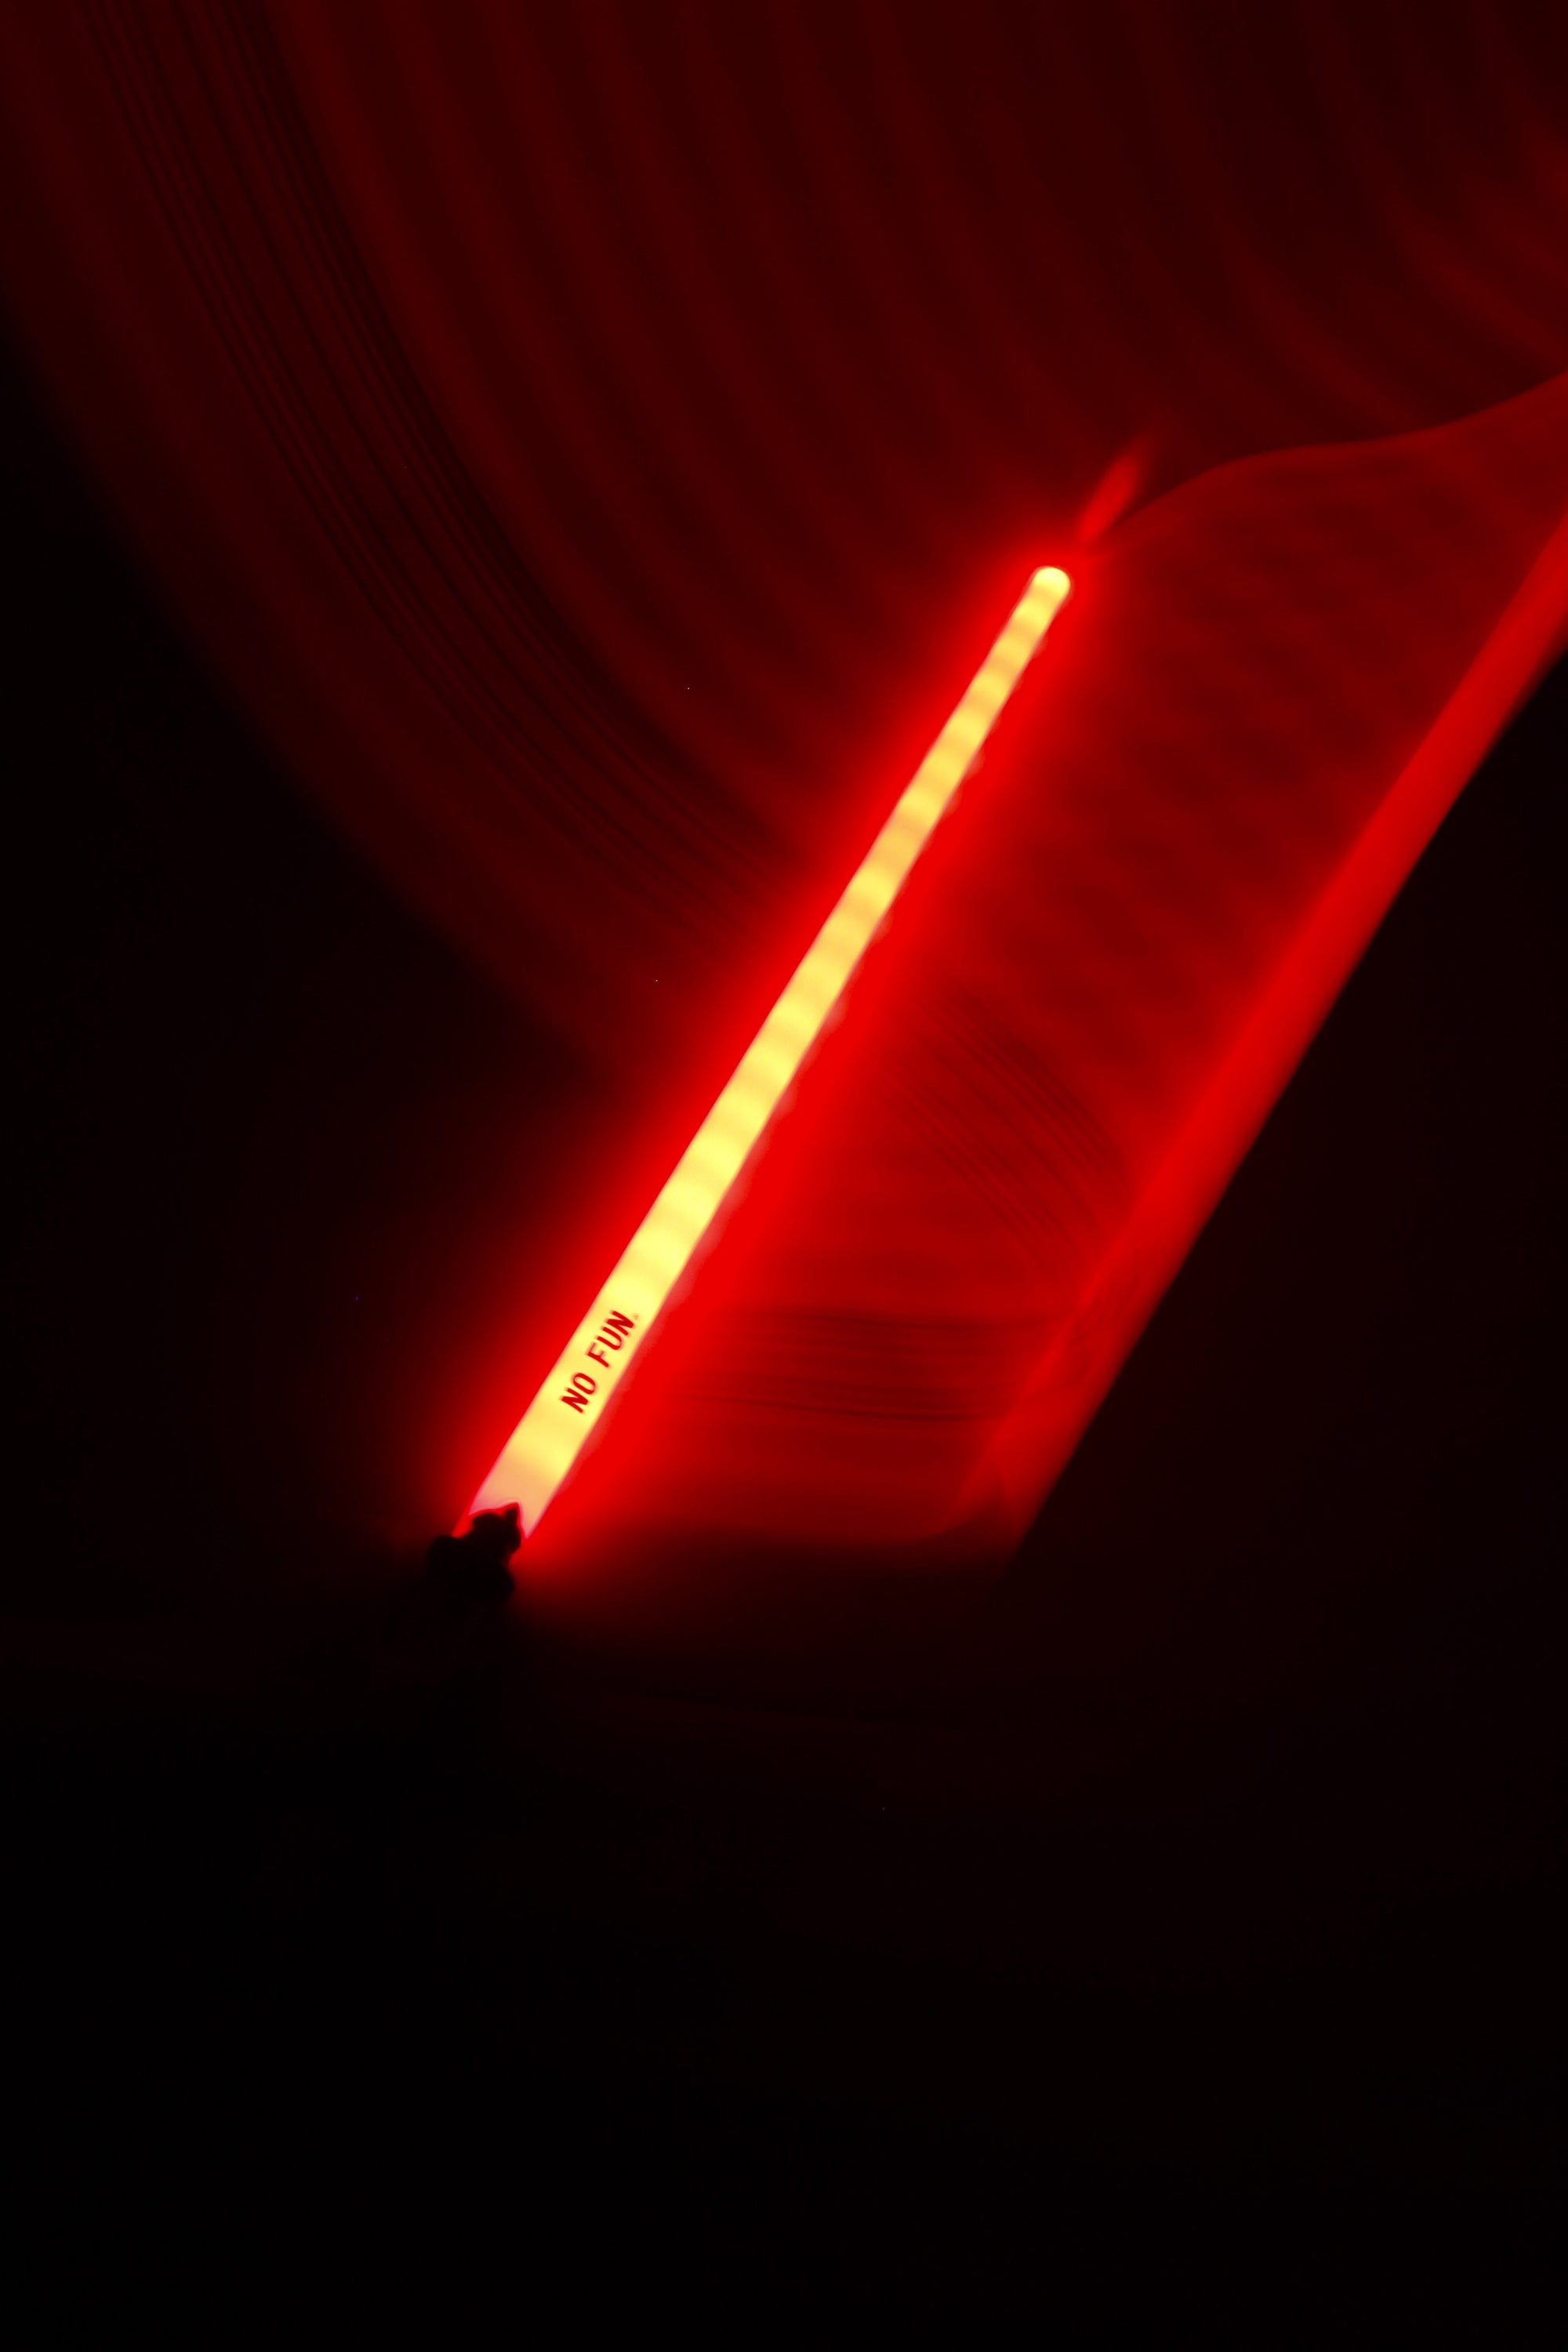 A photo of a red novelty sword illuminating a dark background.  There is a light trail flowing from the sword to the top of the image, showcasing the colour.  The "NO FUN®" logo near the handle is visible to the camera.